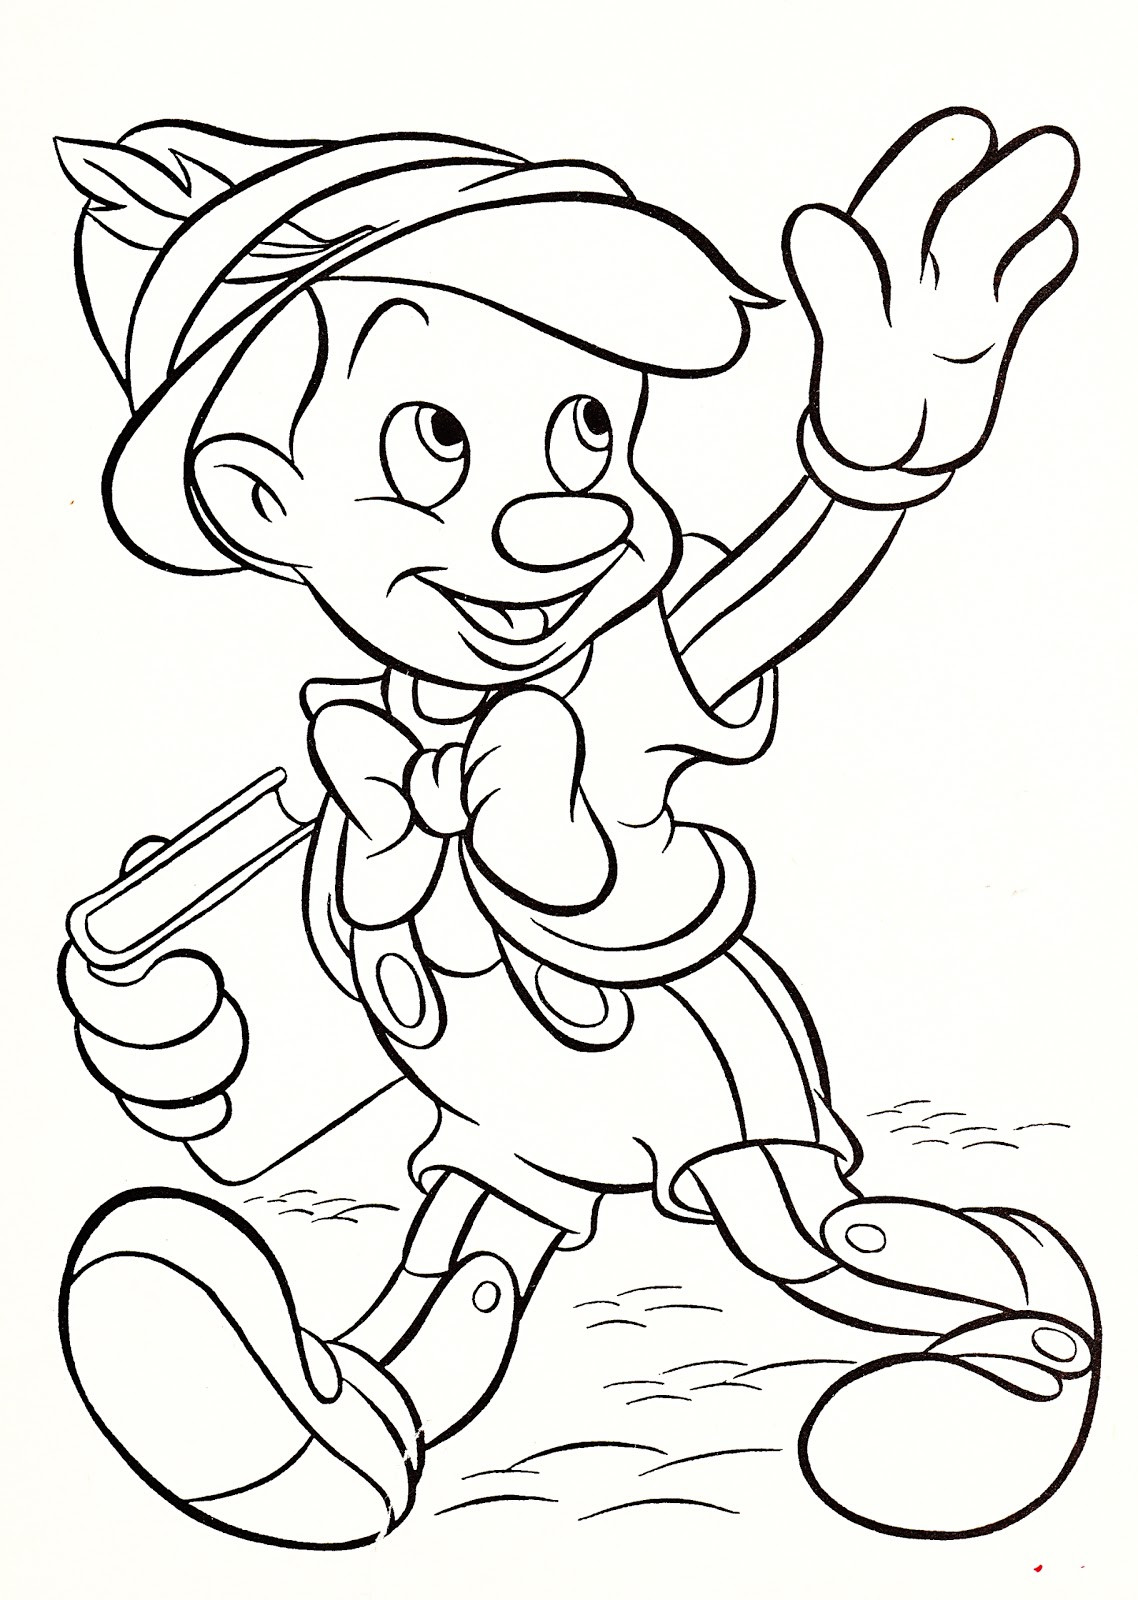 Disney Coloring Pages For Kids
 December 2017 Coloring Pages for Children and Adult